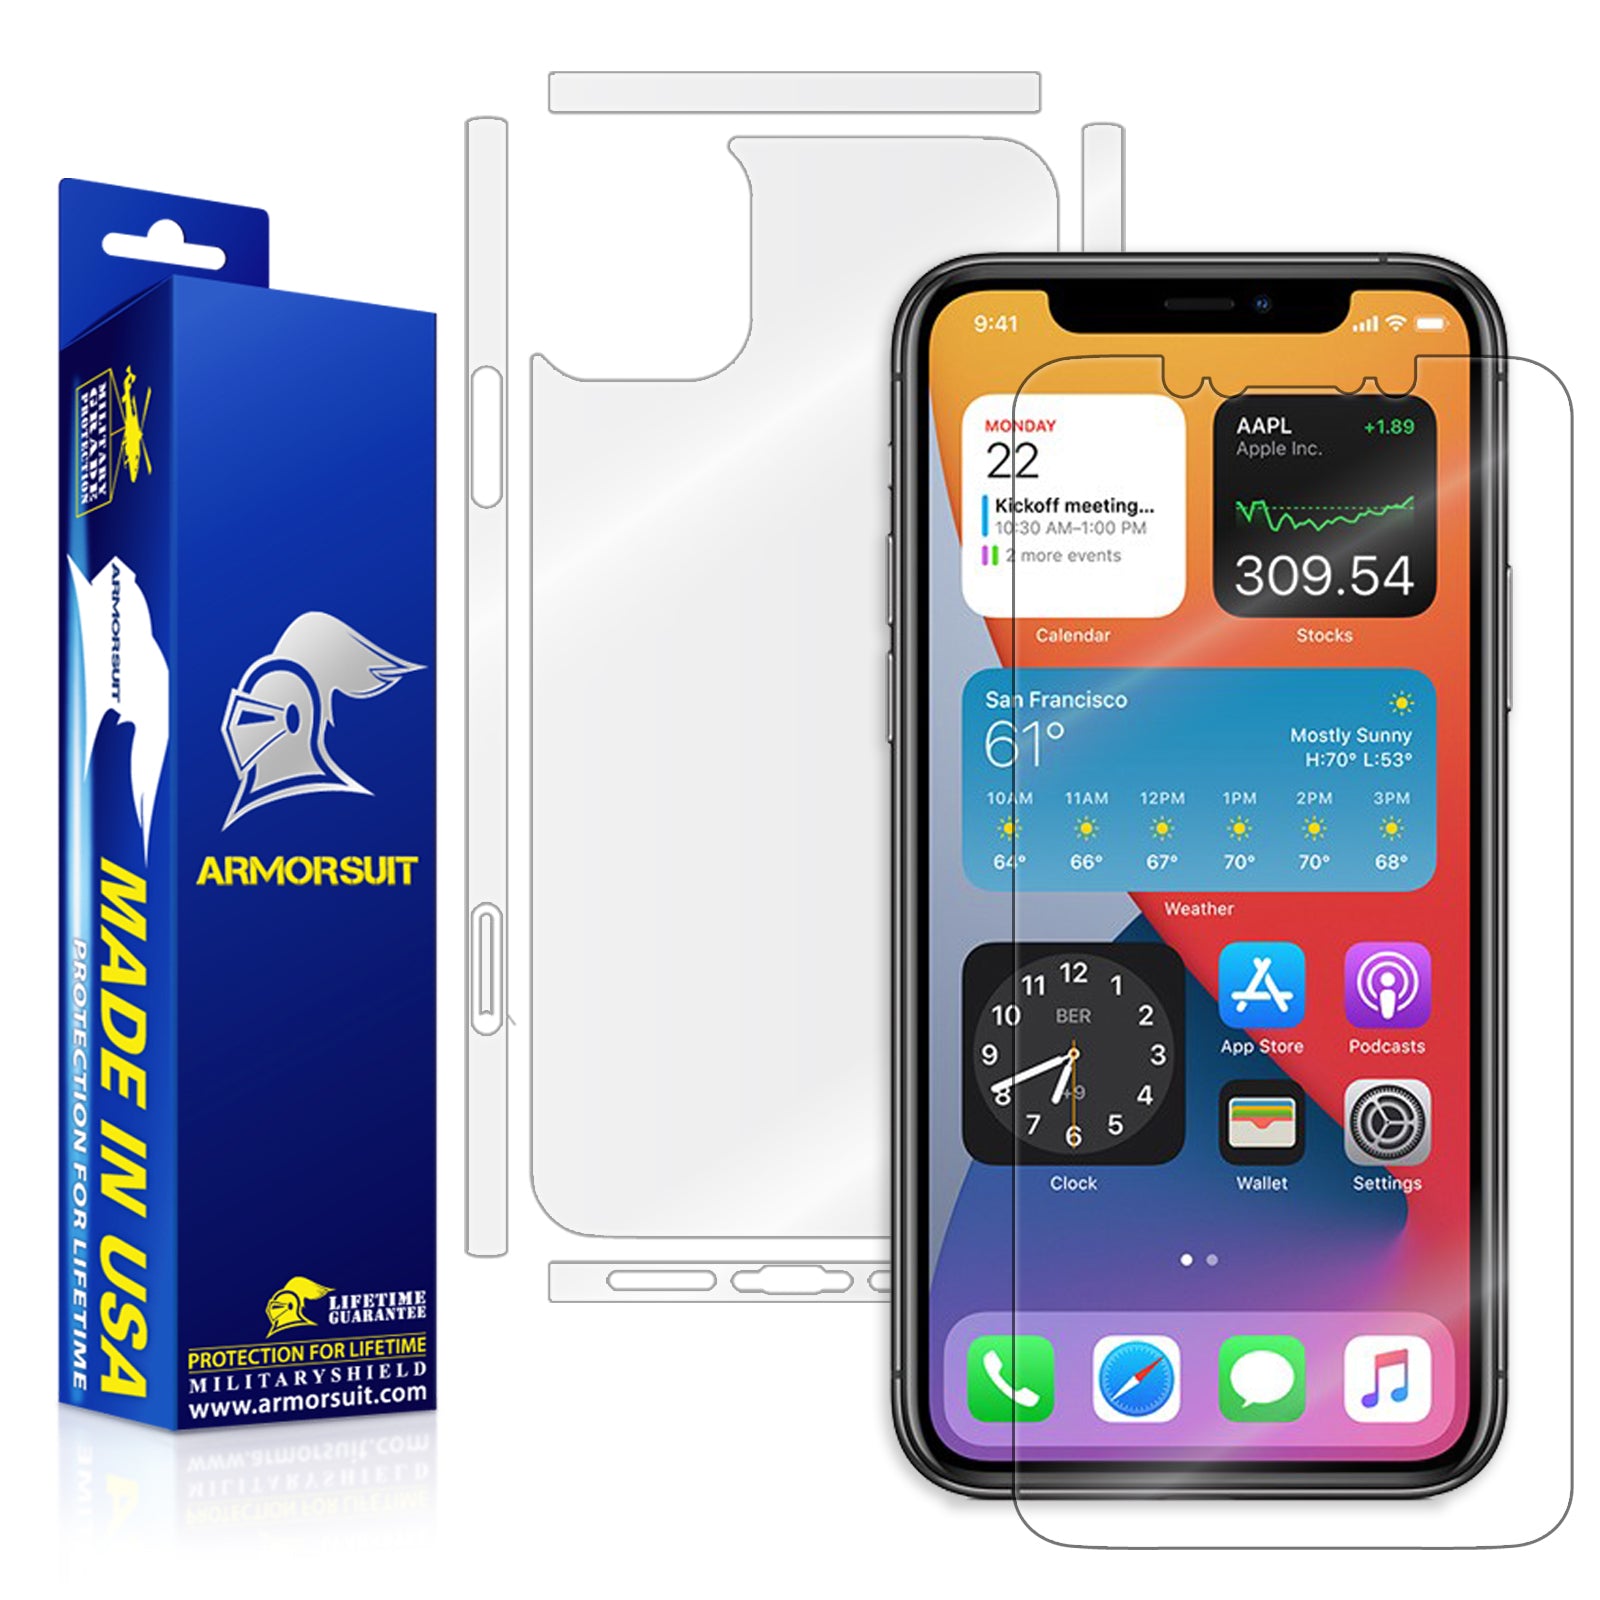 Apple iPhone 11 Pro Max Screen Protector + Full Body Skin Protector